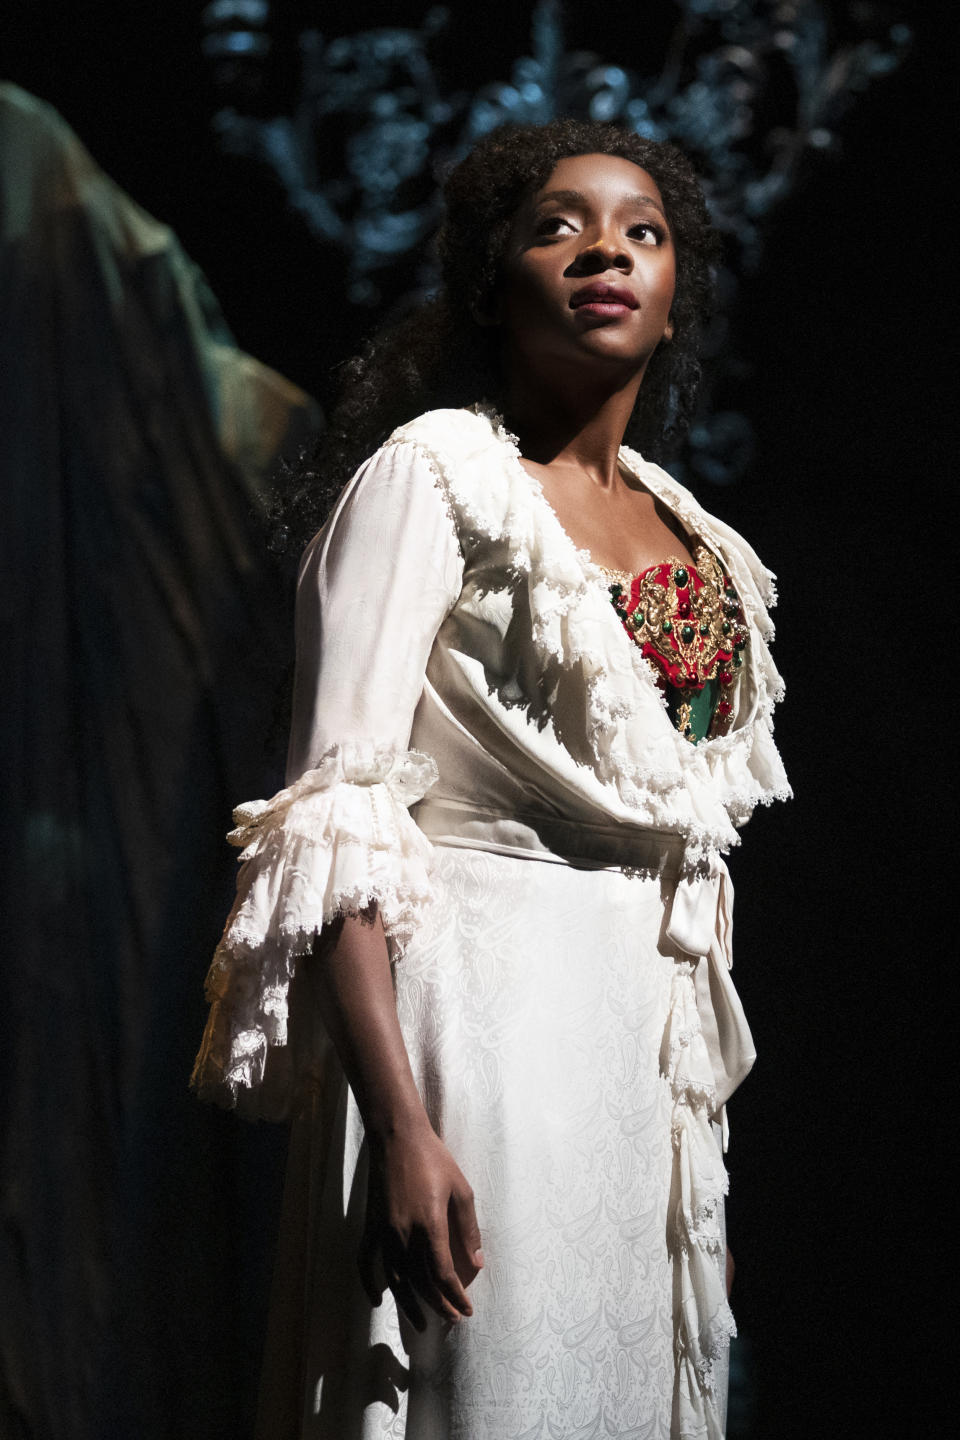 Emilie Kouatchou portrays Christine in a performance of "The Phantom of the Opera" in New York. Kouatchou is the first Black woman to play the role in the show’s 33-year history. (Matthew Murphy via AP)